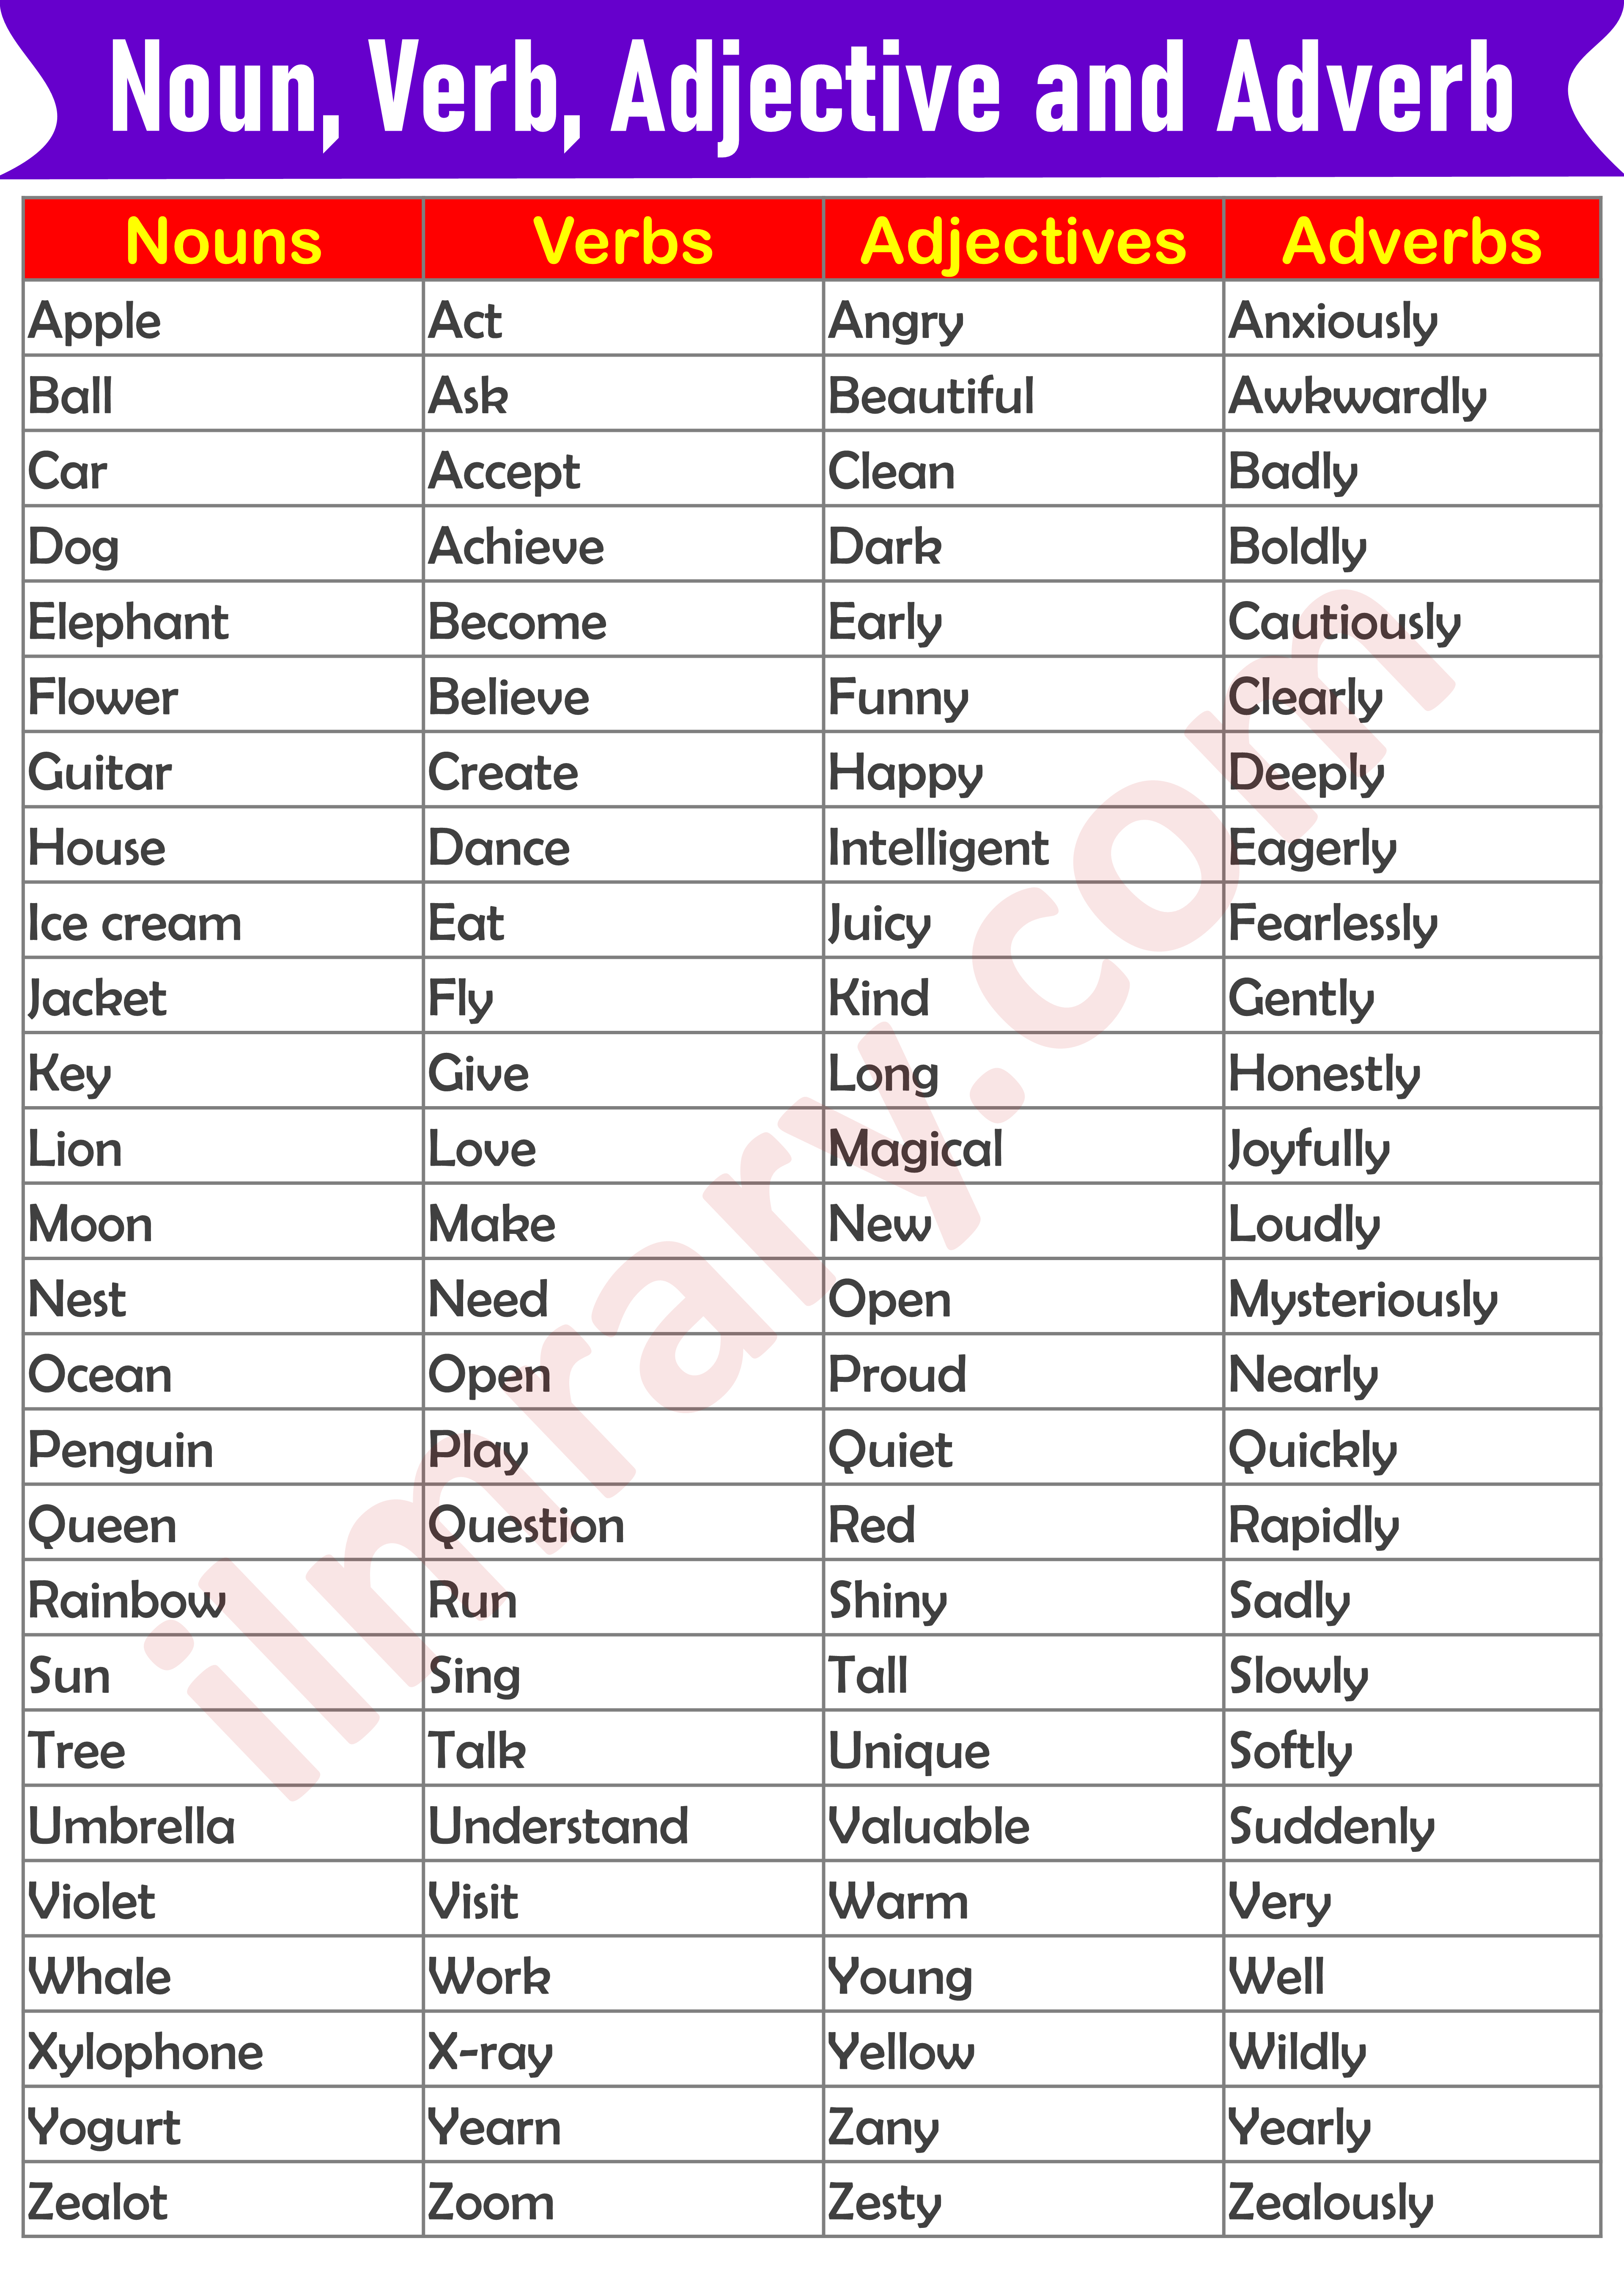 Noun, Verb, Adjective, Adverb List A to Z in English